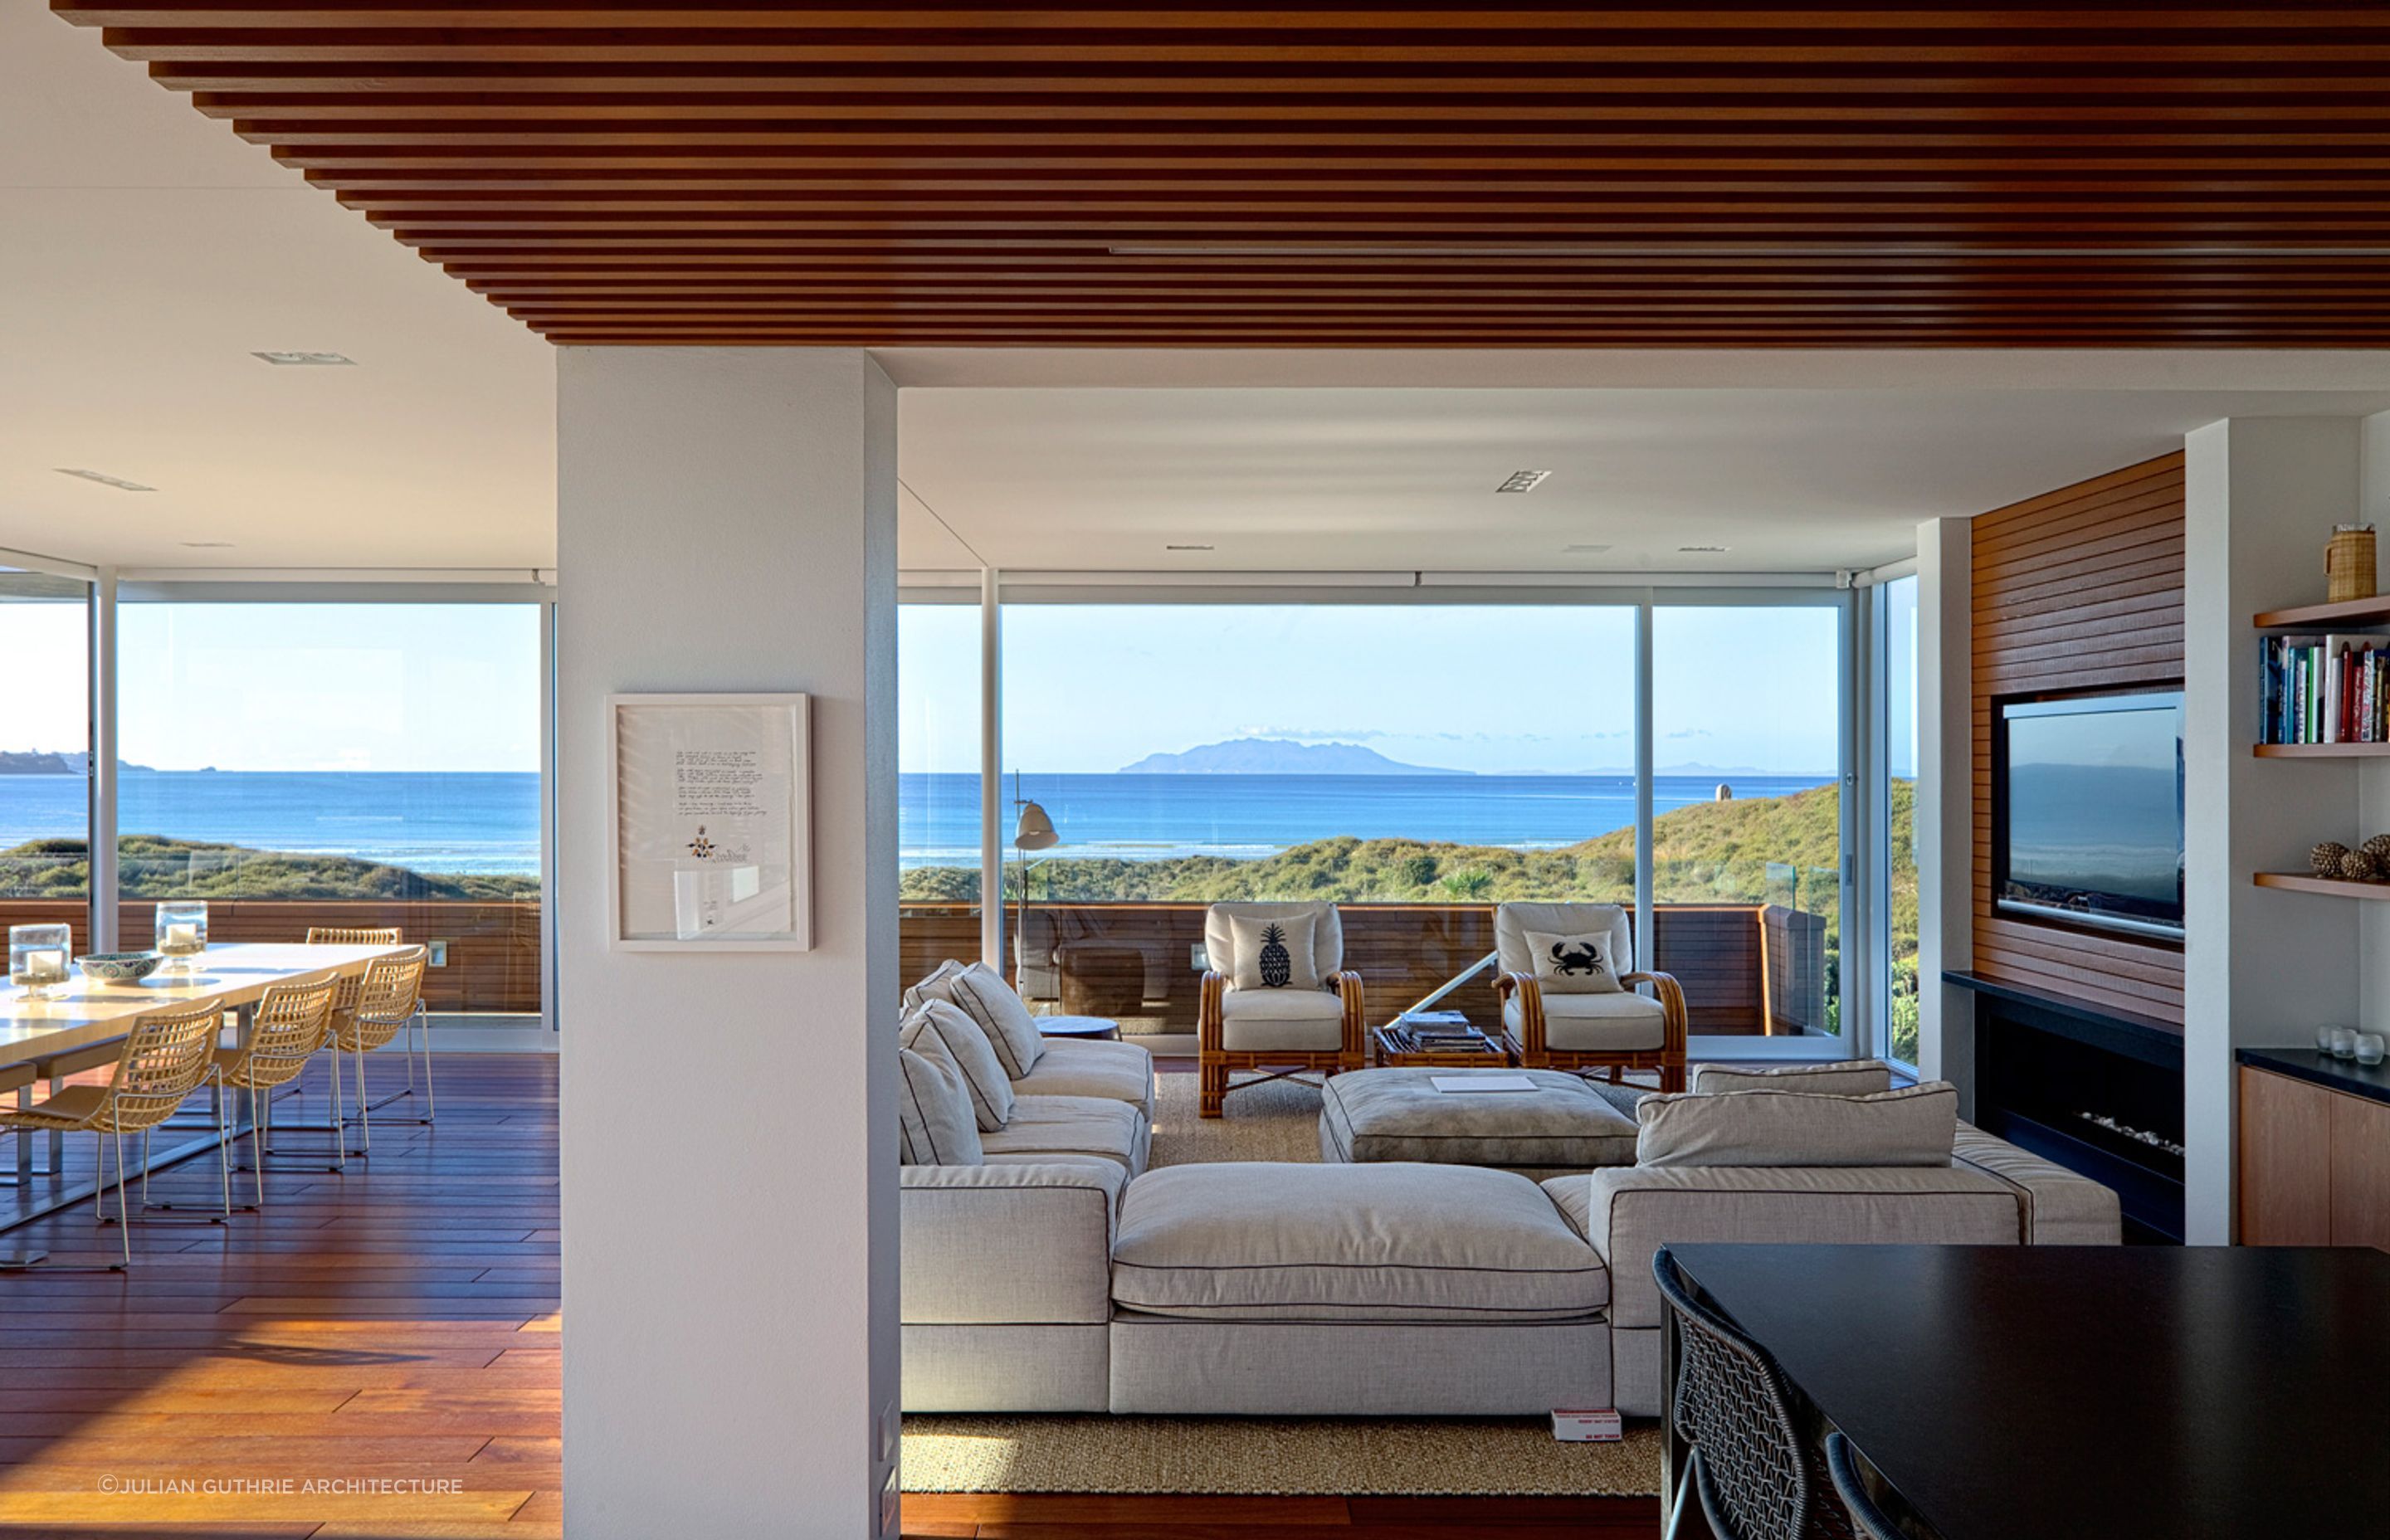 Comfort combined with unobstructed views like this epitomise the very best in holiday home design. | Photography: Patrick Reynolds